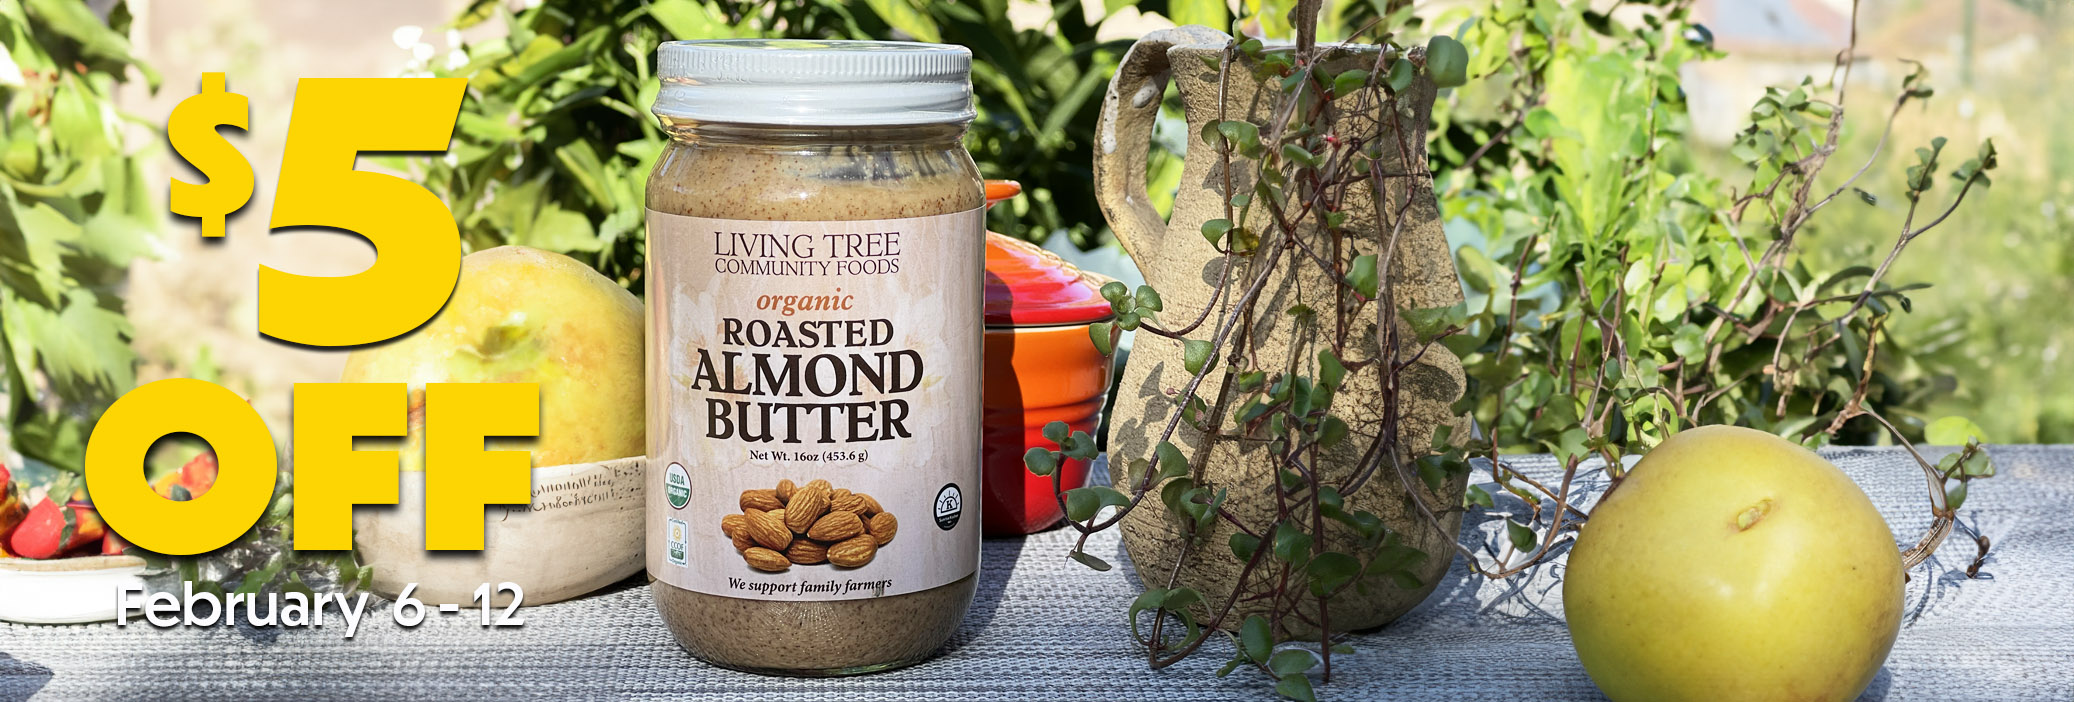 Roasted Almond Butter Weekly Sale Banner